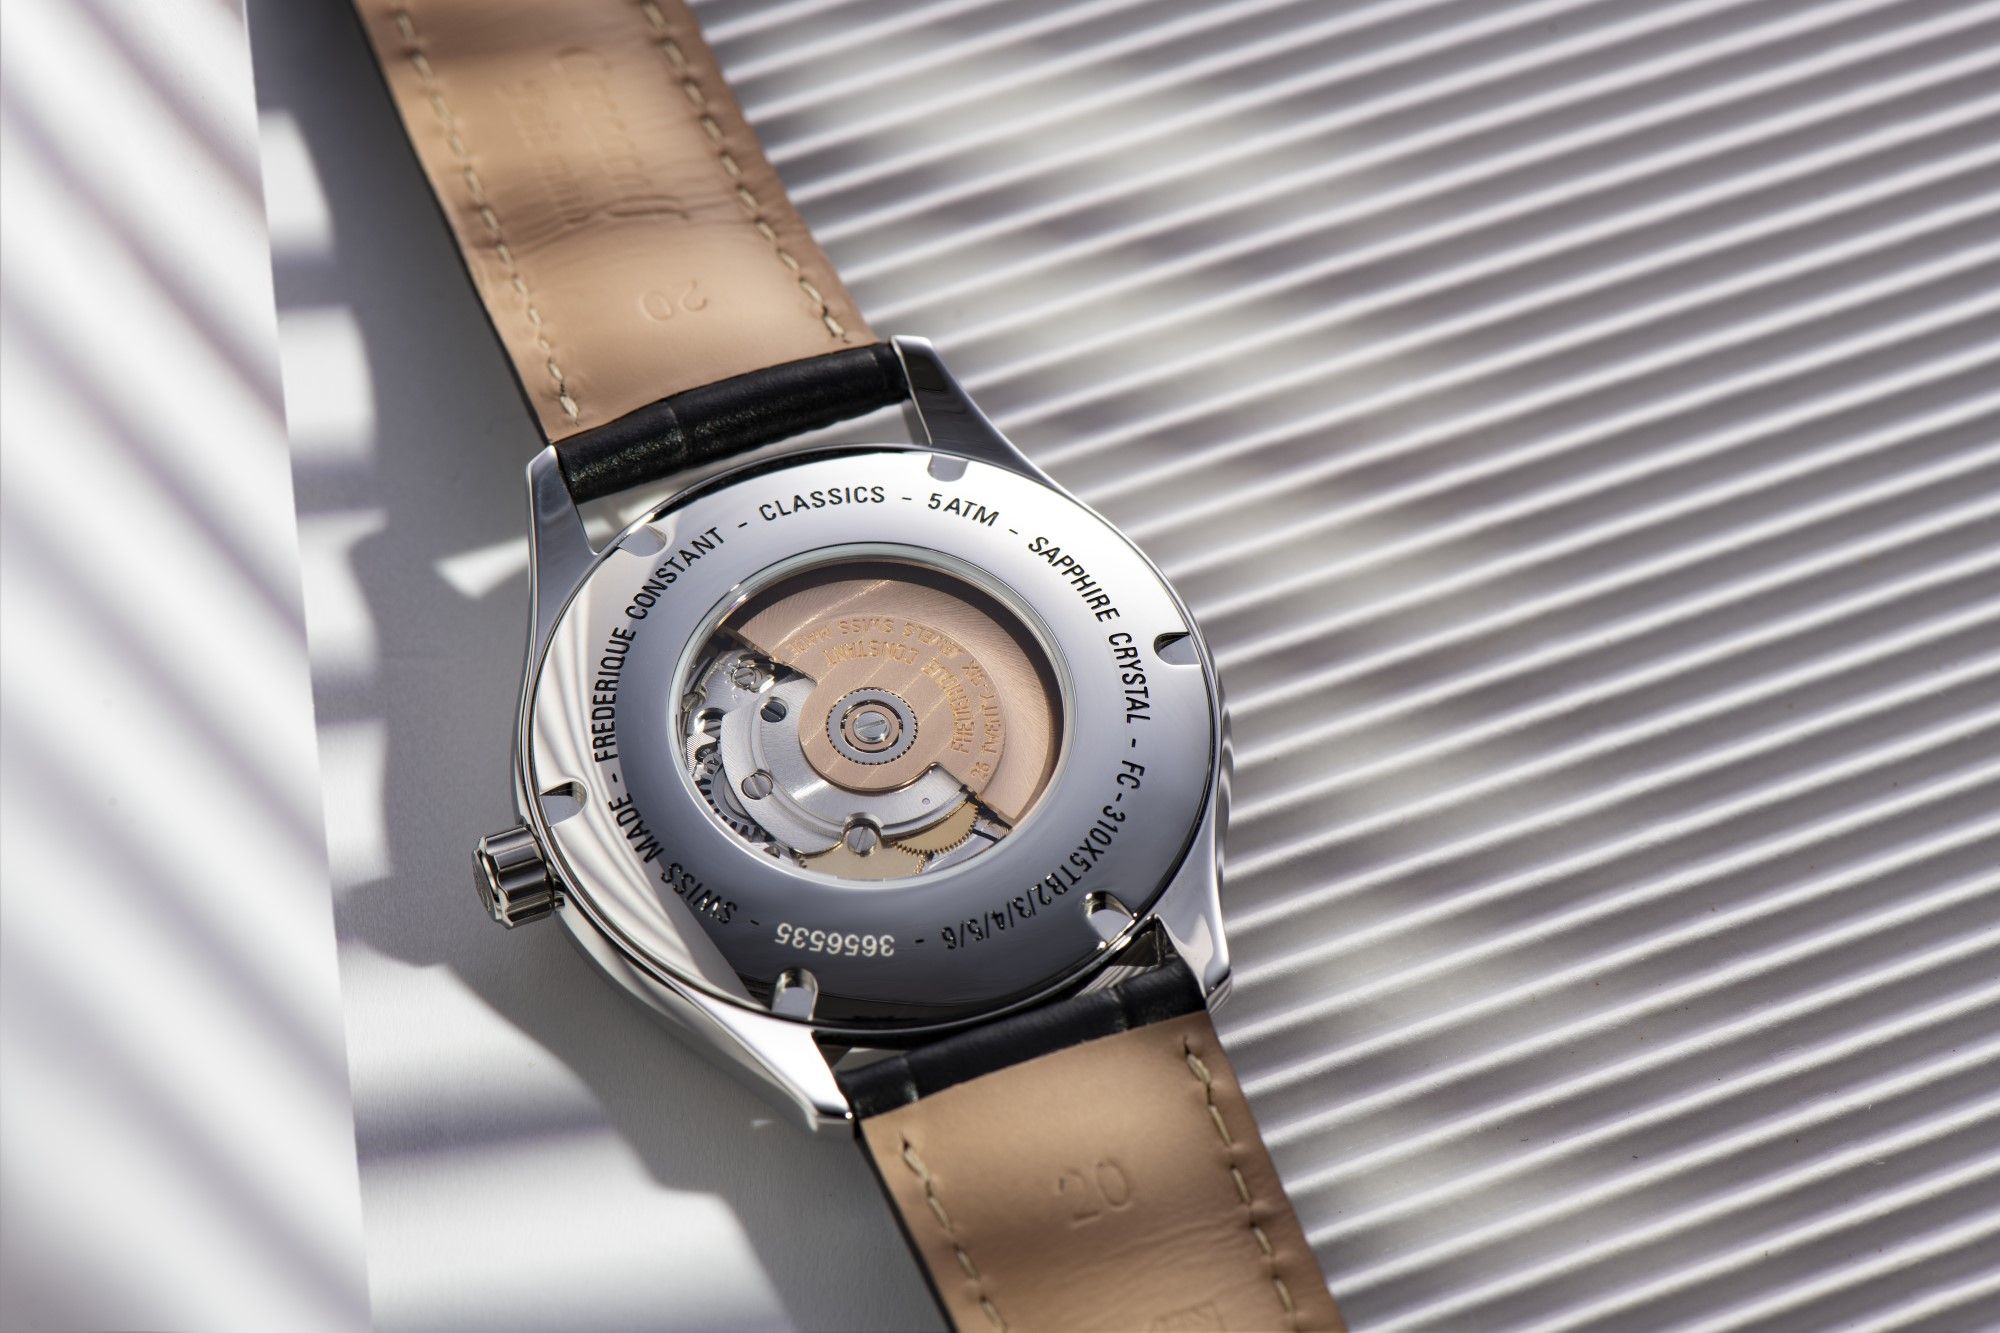 Each model is powered by the automated FC-303 calibre, which has a 38-hour power reserve.